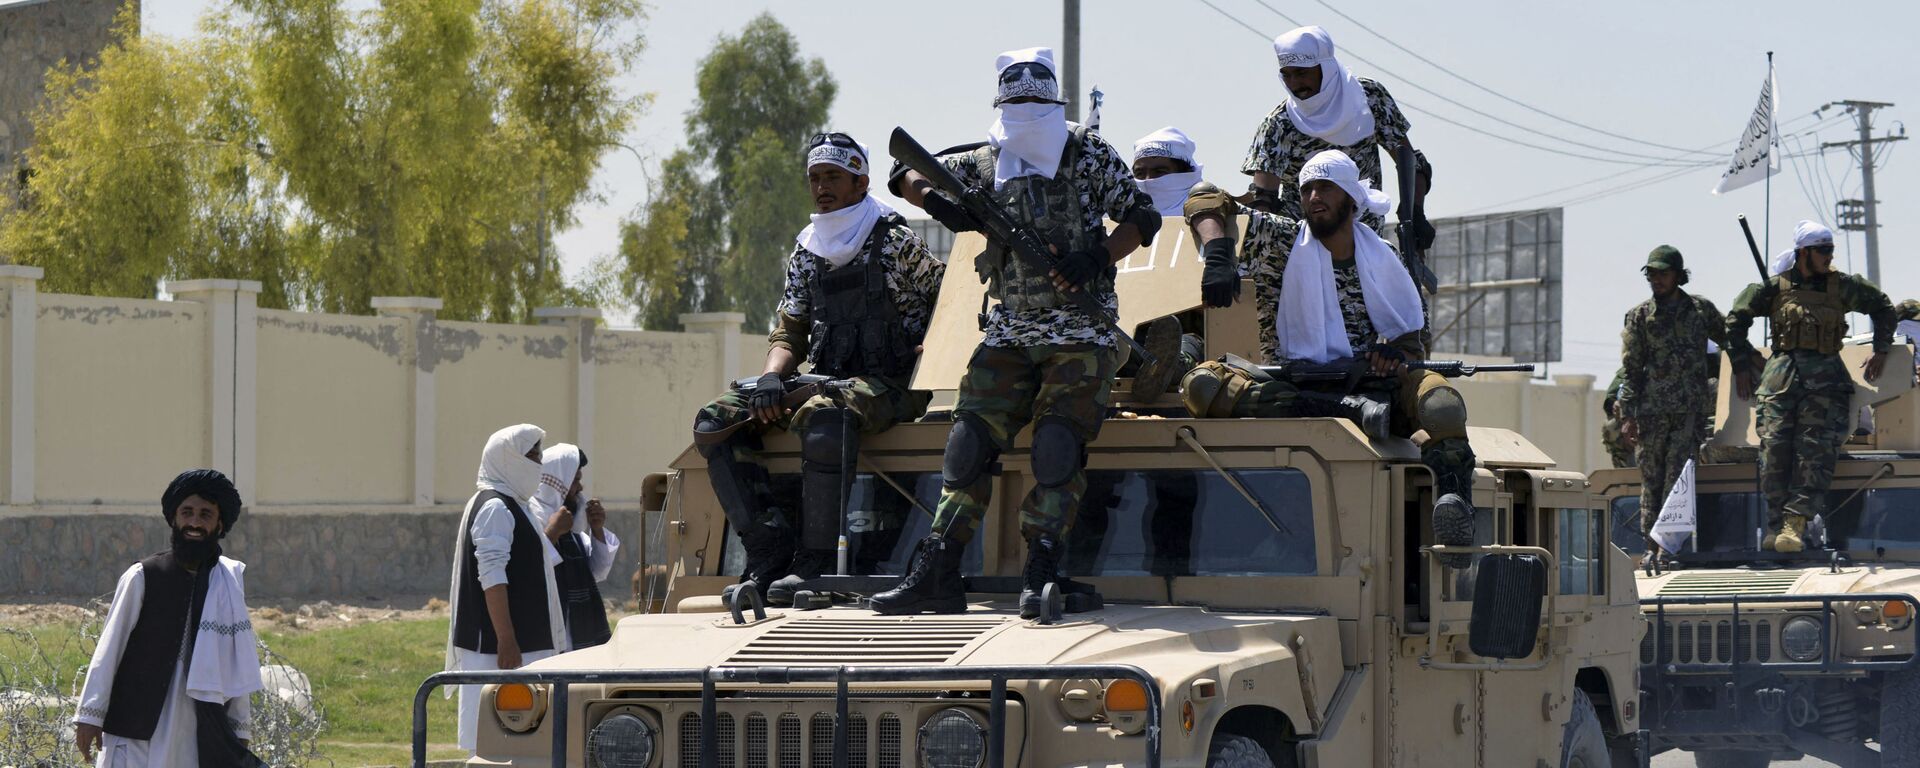 Taliban fighters atop Humvee vehicles parade along a road to celebrate after the US pulled all its troops out of Afghanistan, in Kandahar on September 1, 2021 following the Taliban’s military takeover of the country - Sputnik International, 1920, 02.09.2021